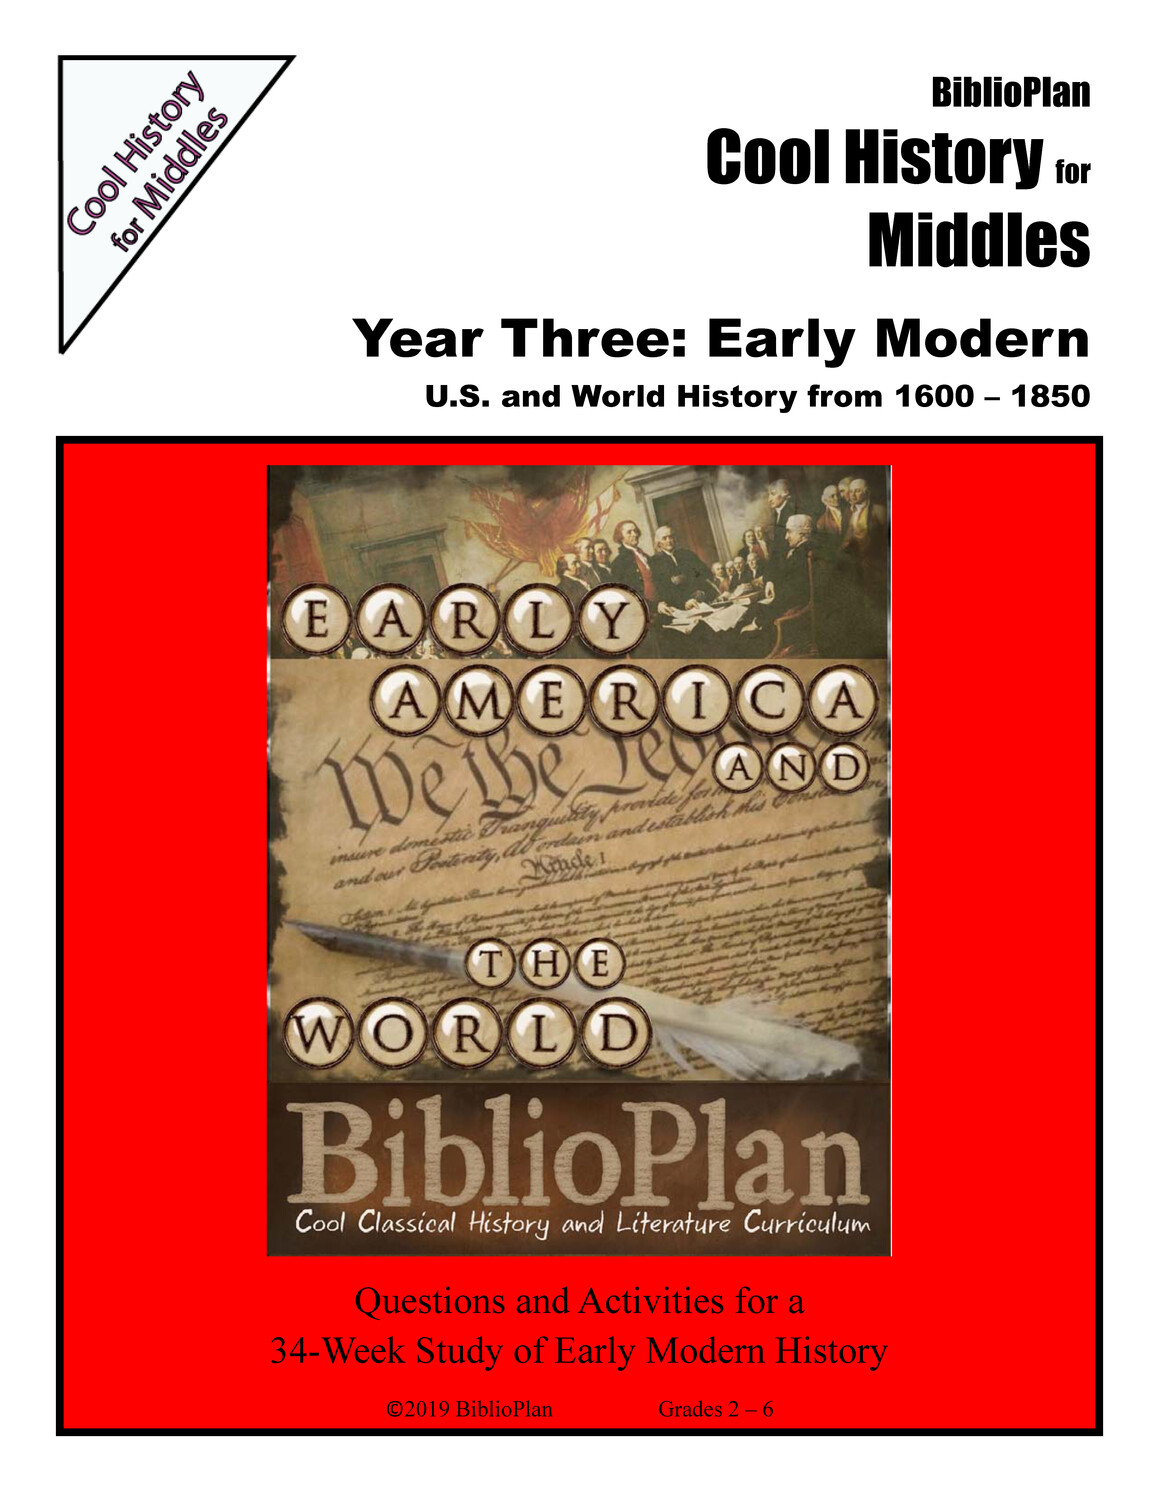 Early Modern Cool History for Middles Ebook